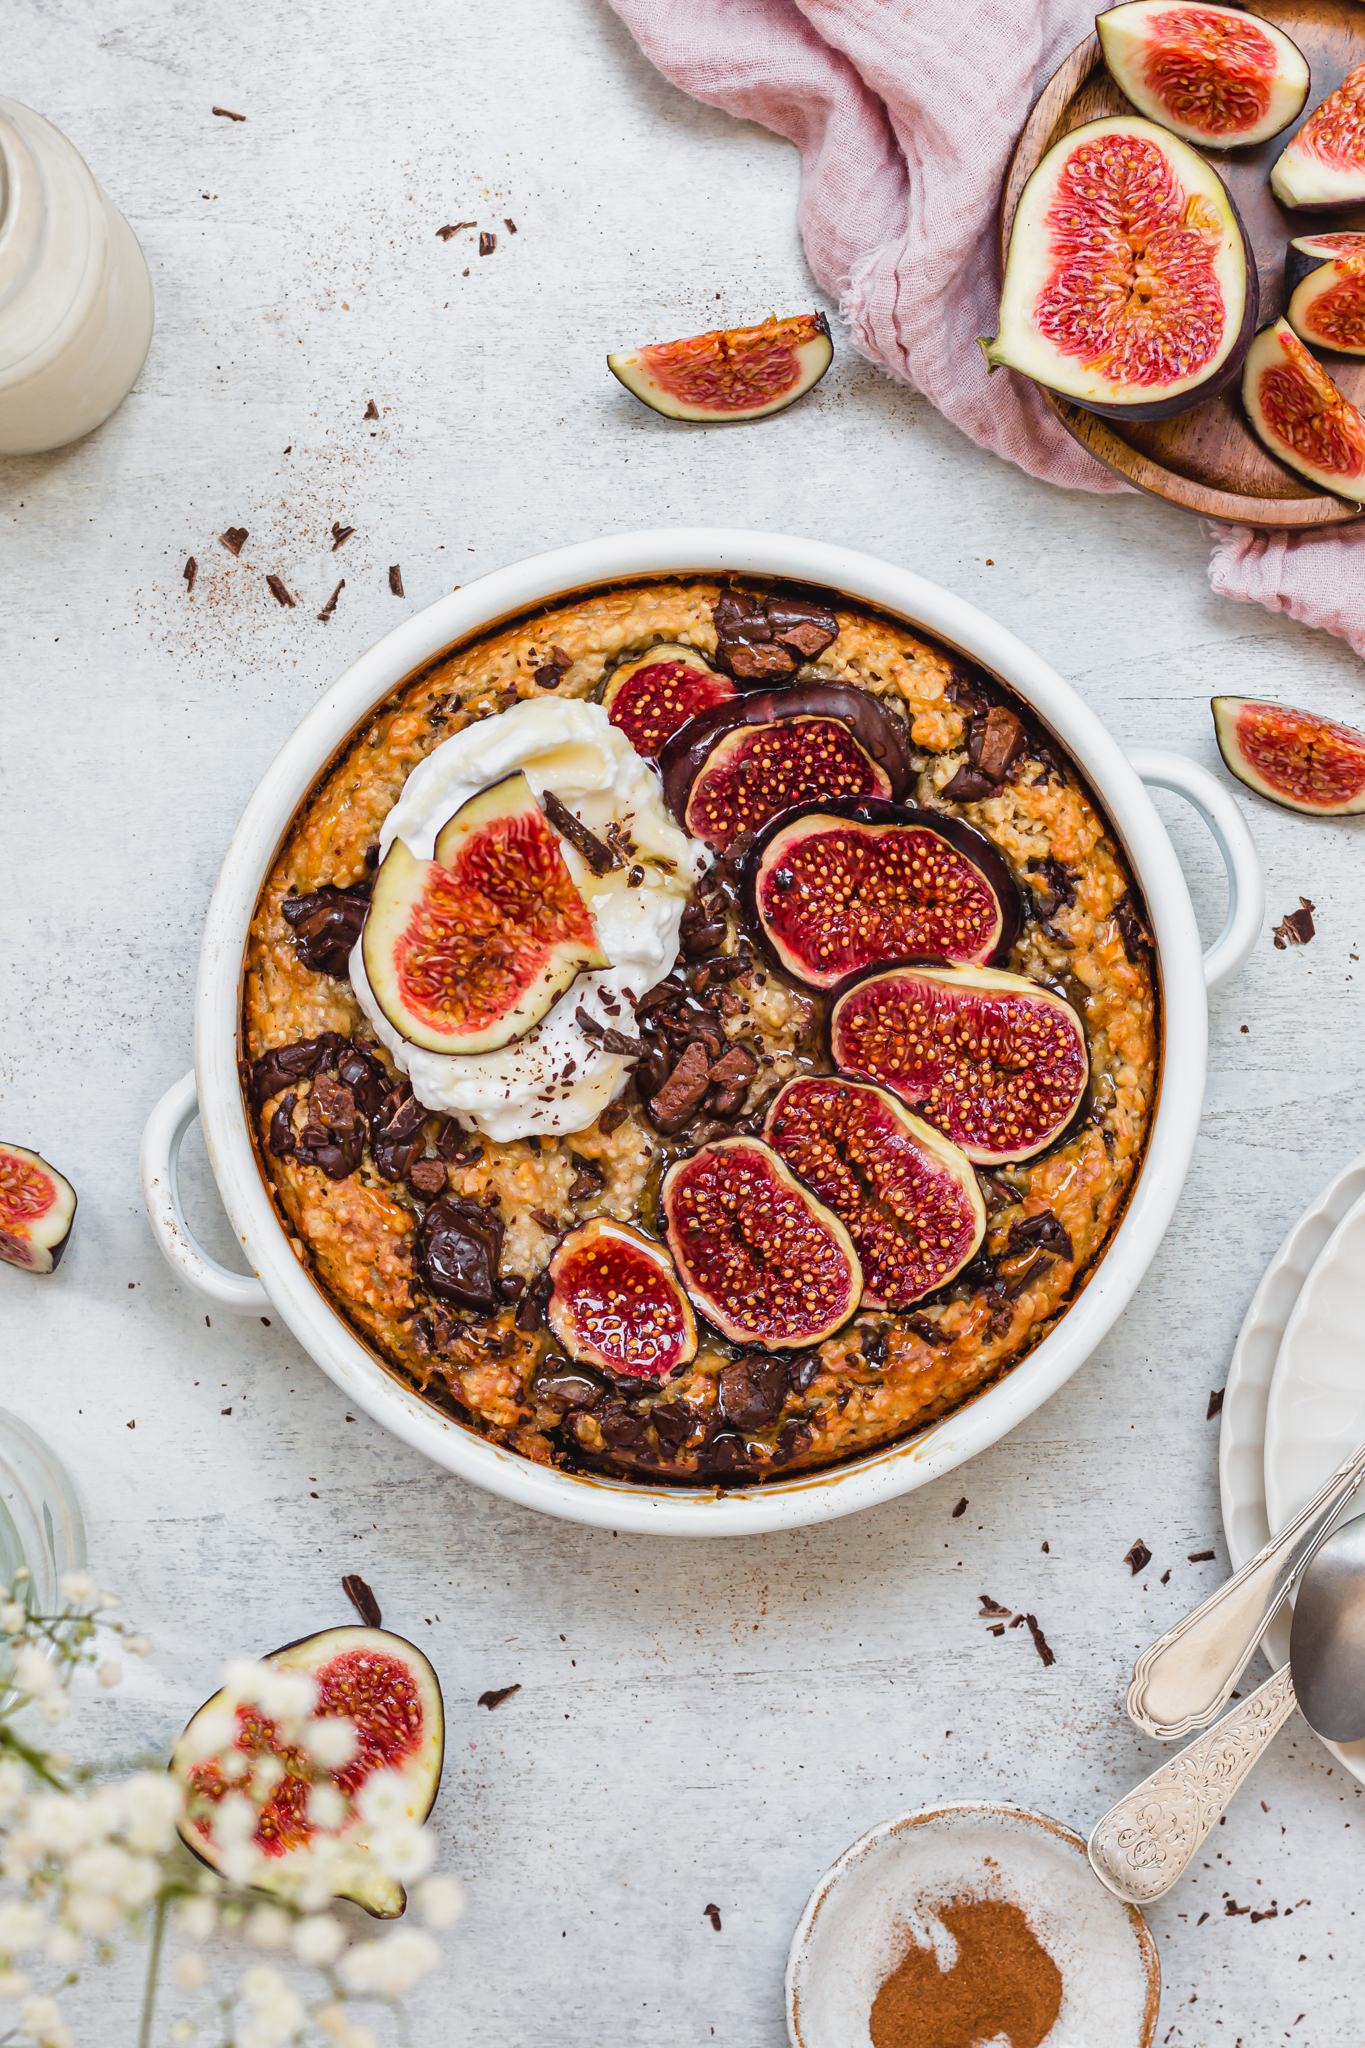 Chocolate and Fig Baked Oats out of the oven